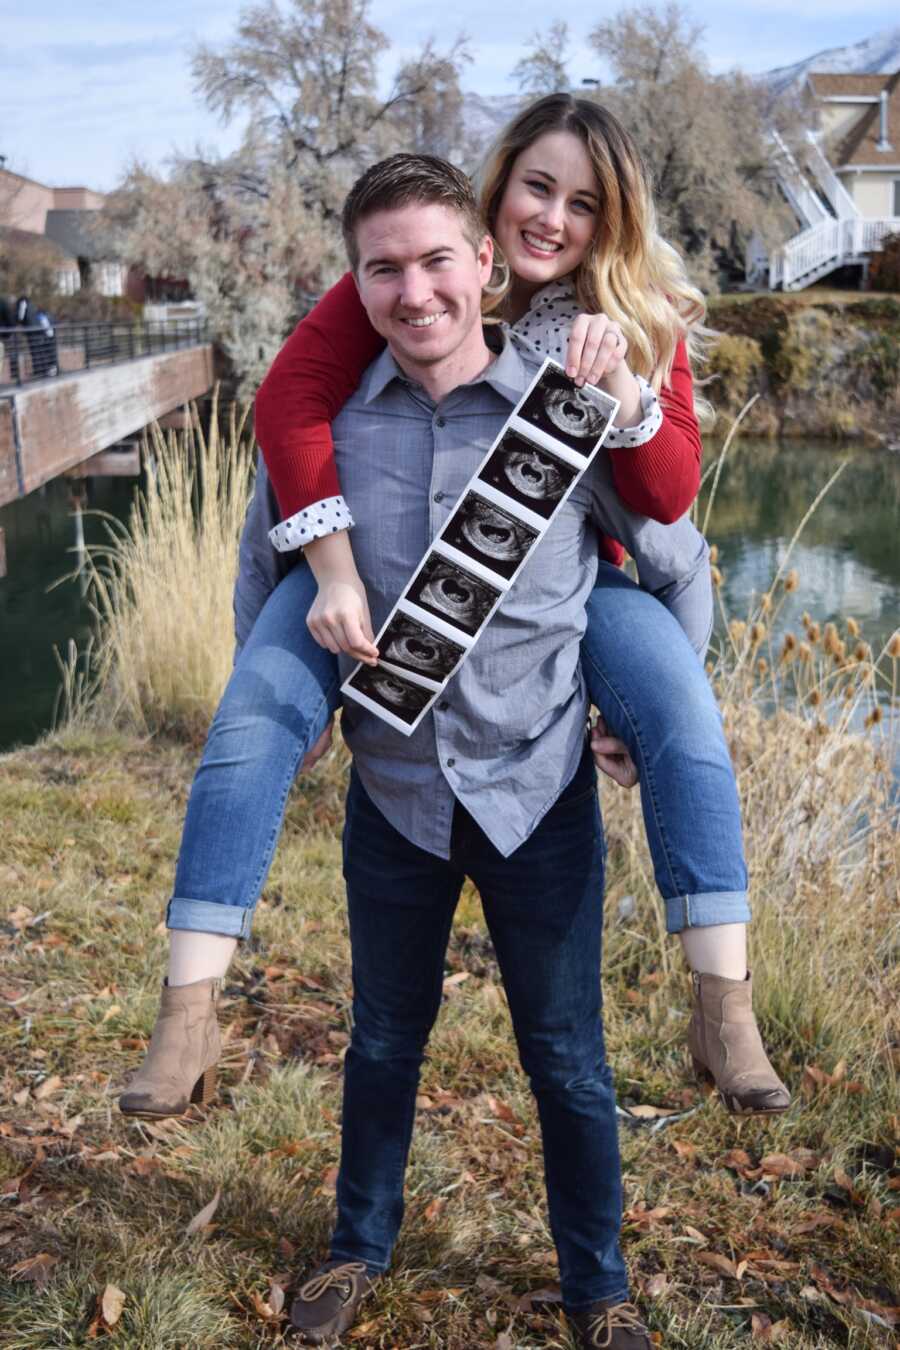 husband giving wife a piggyback ride while she holds ultrasound image